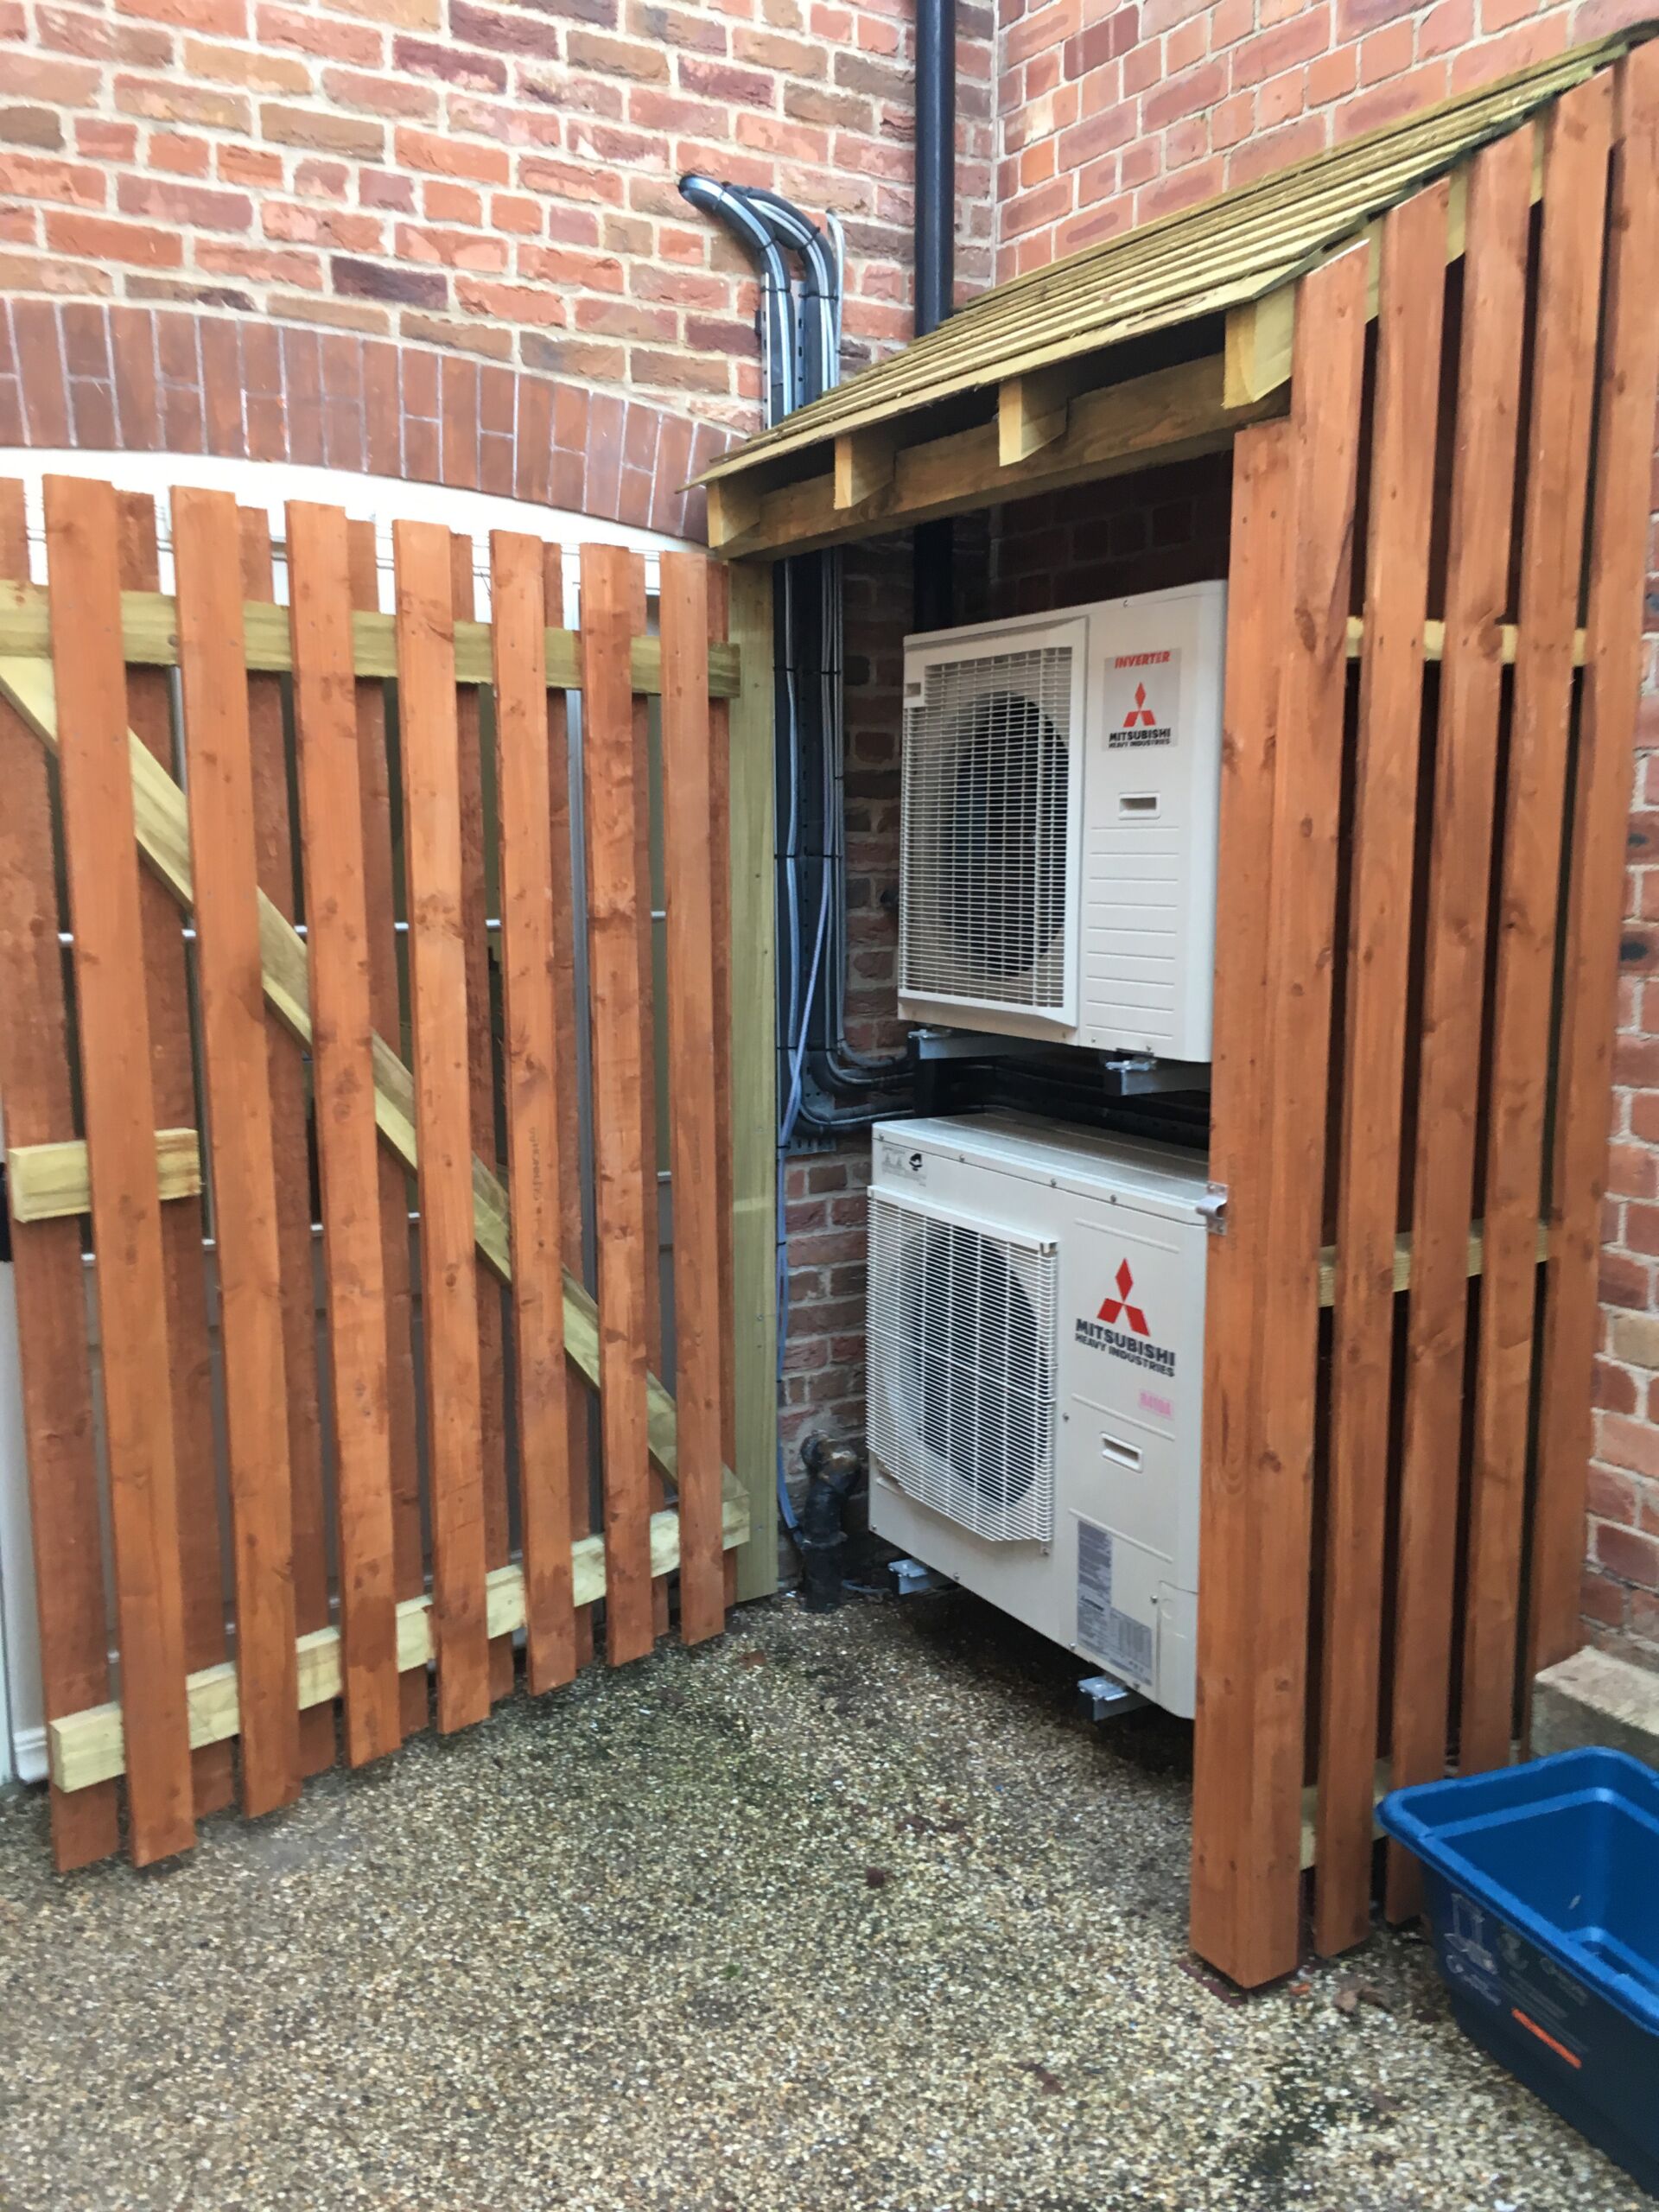 2 air conditioning units installed on a wall in a wooden protective box